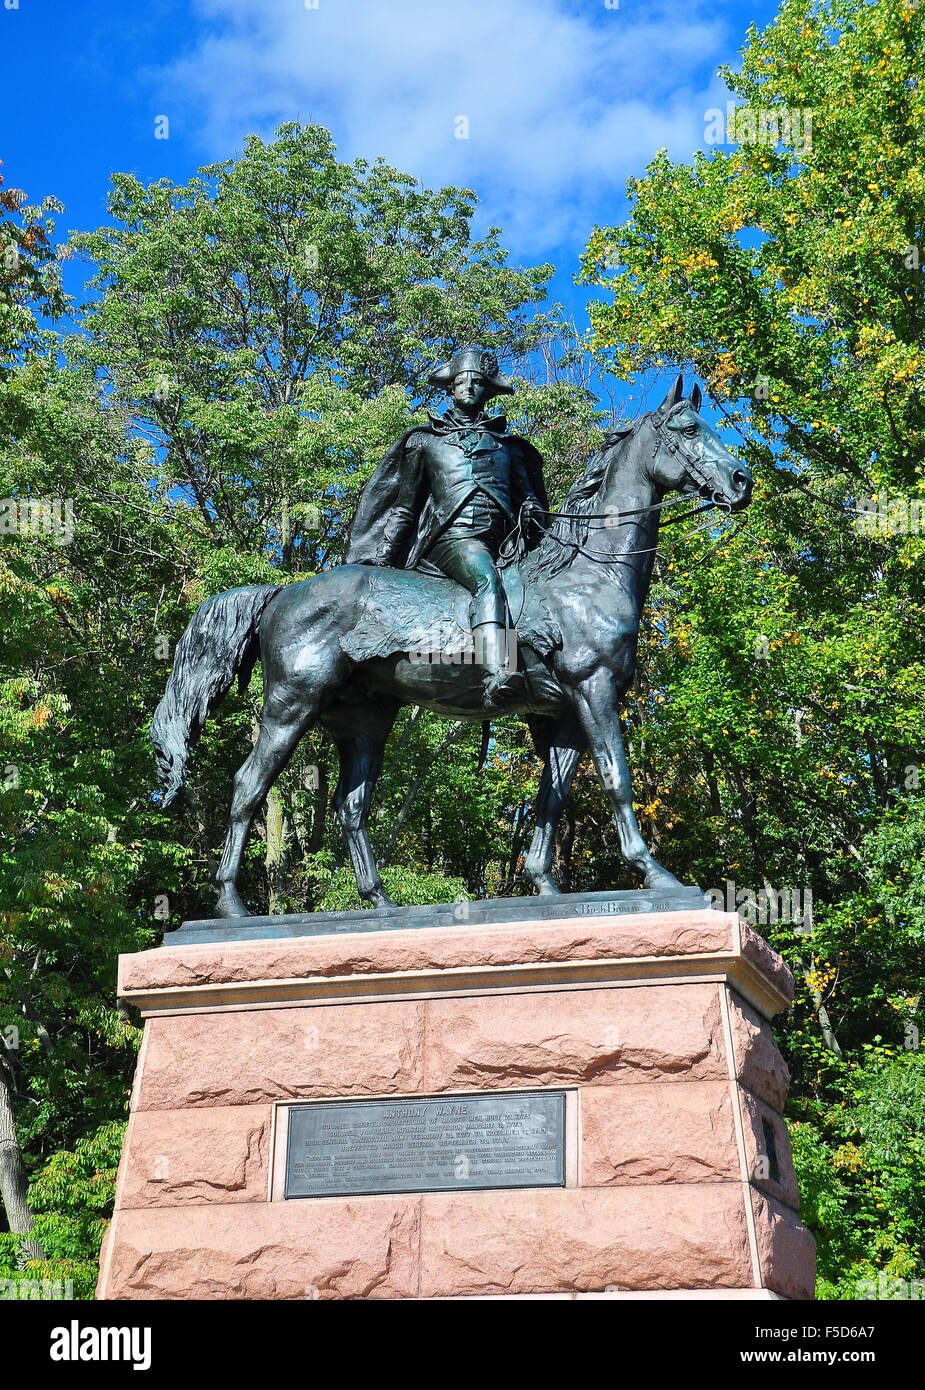 Valley Forge, Pennsylvania: Equestrian Statue von General Anthony Wayne bei Valley Forge National Historic Park * Stockfoto